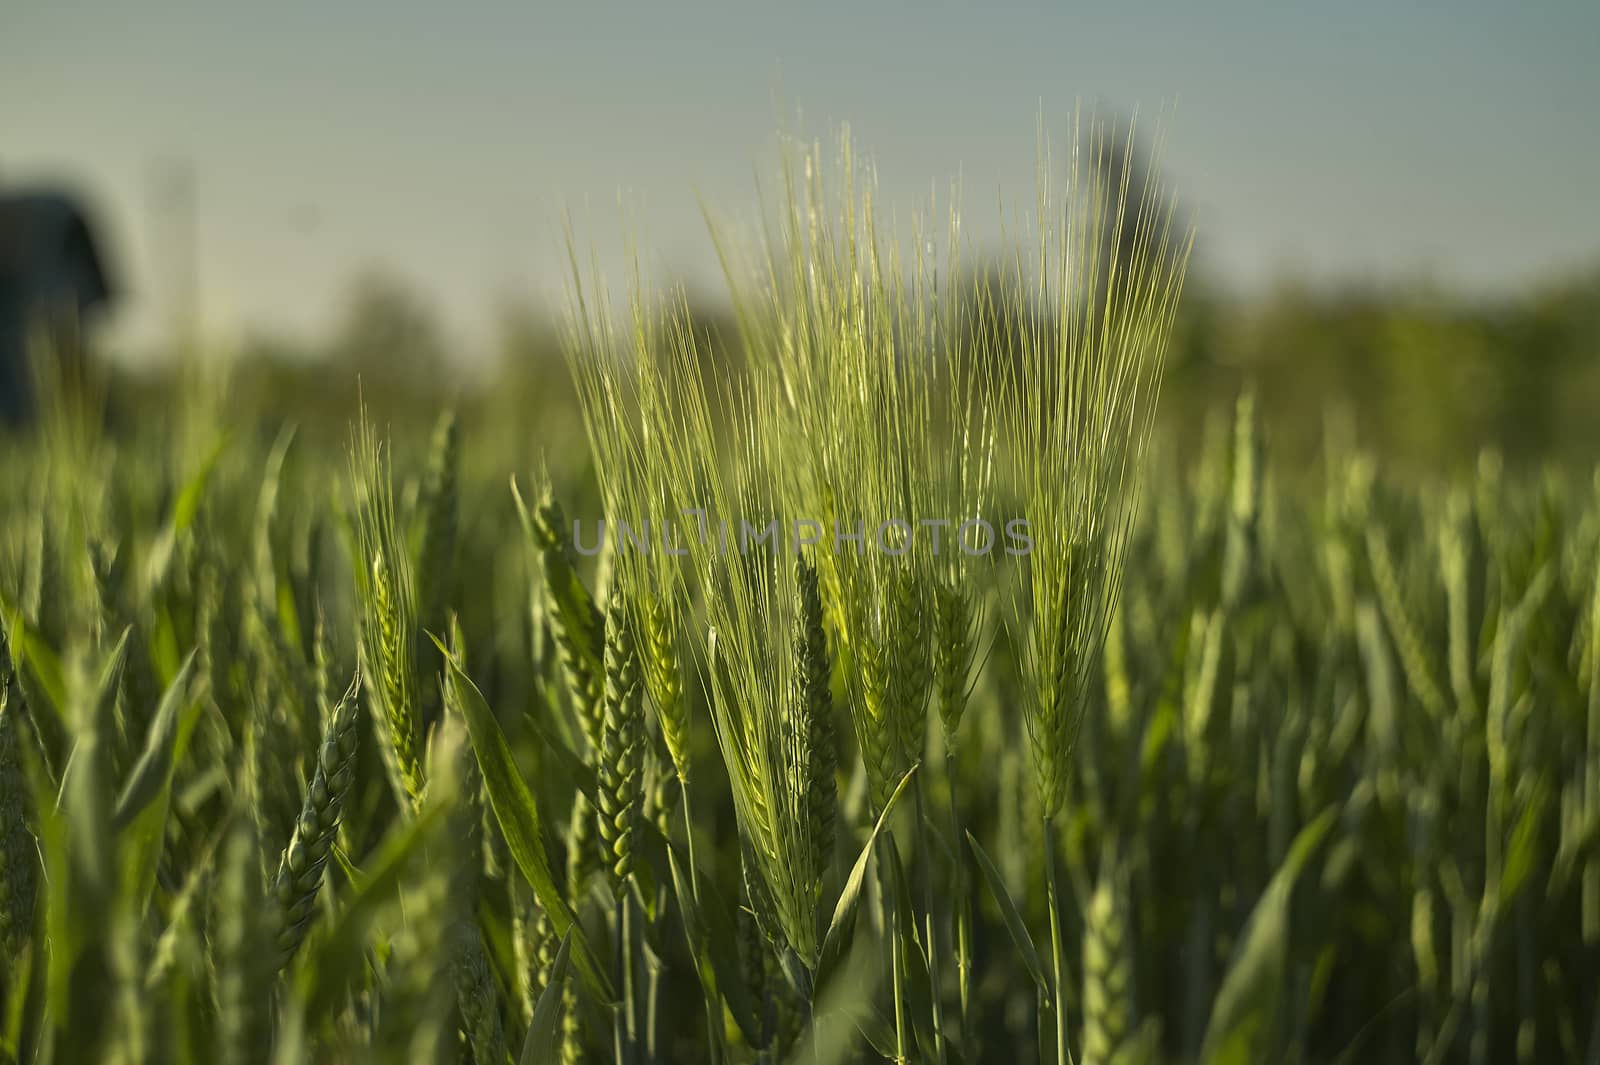 Macro shot of some ears of wheat in a field of barley taken at sunset